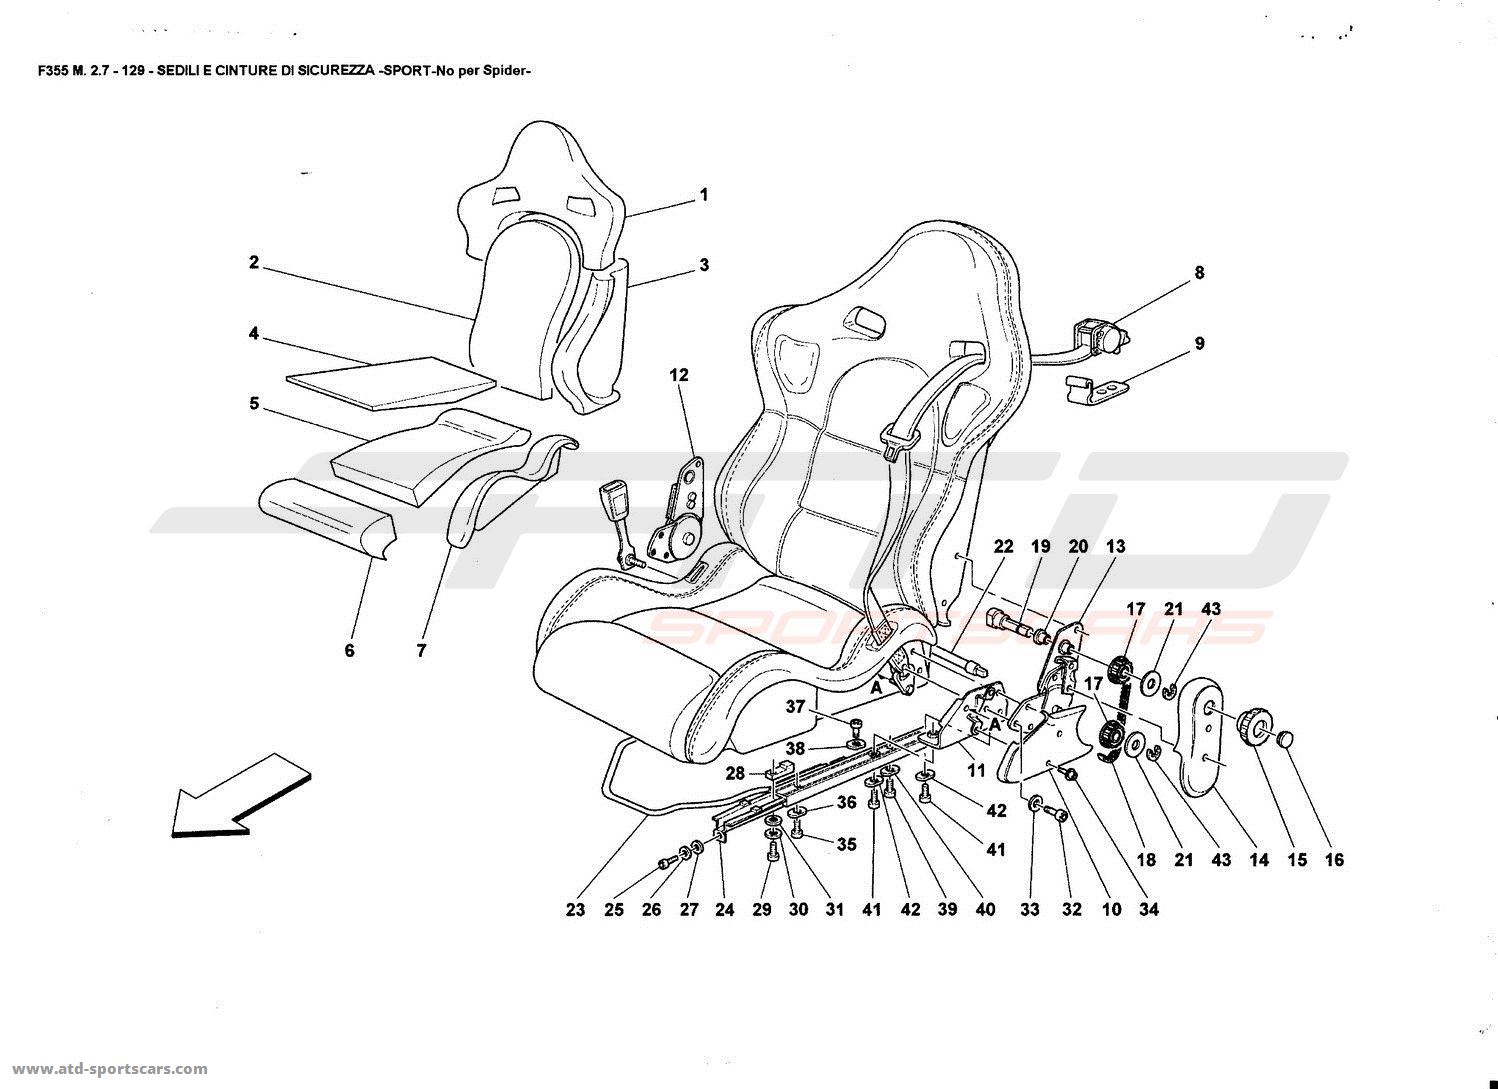 SEATS AND SAFETY BELTS -SPORT-Nat far Spider-